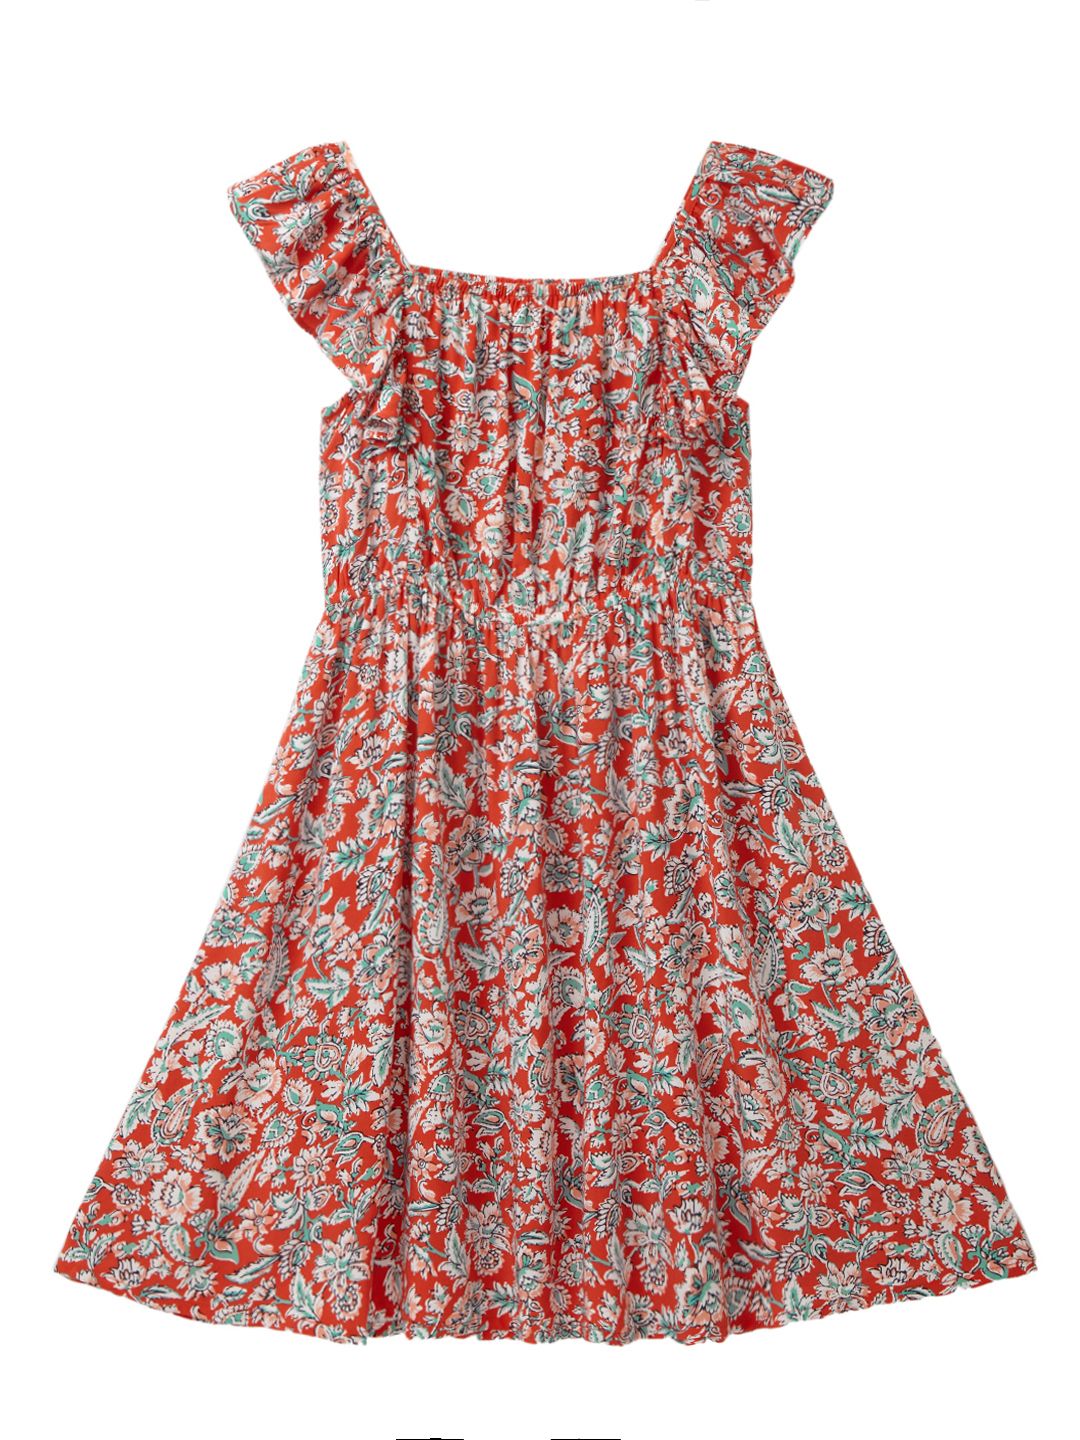 CubMcPaws Girls Sleeveless Floral Printed Rayon Red Dress